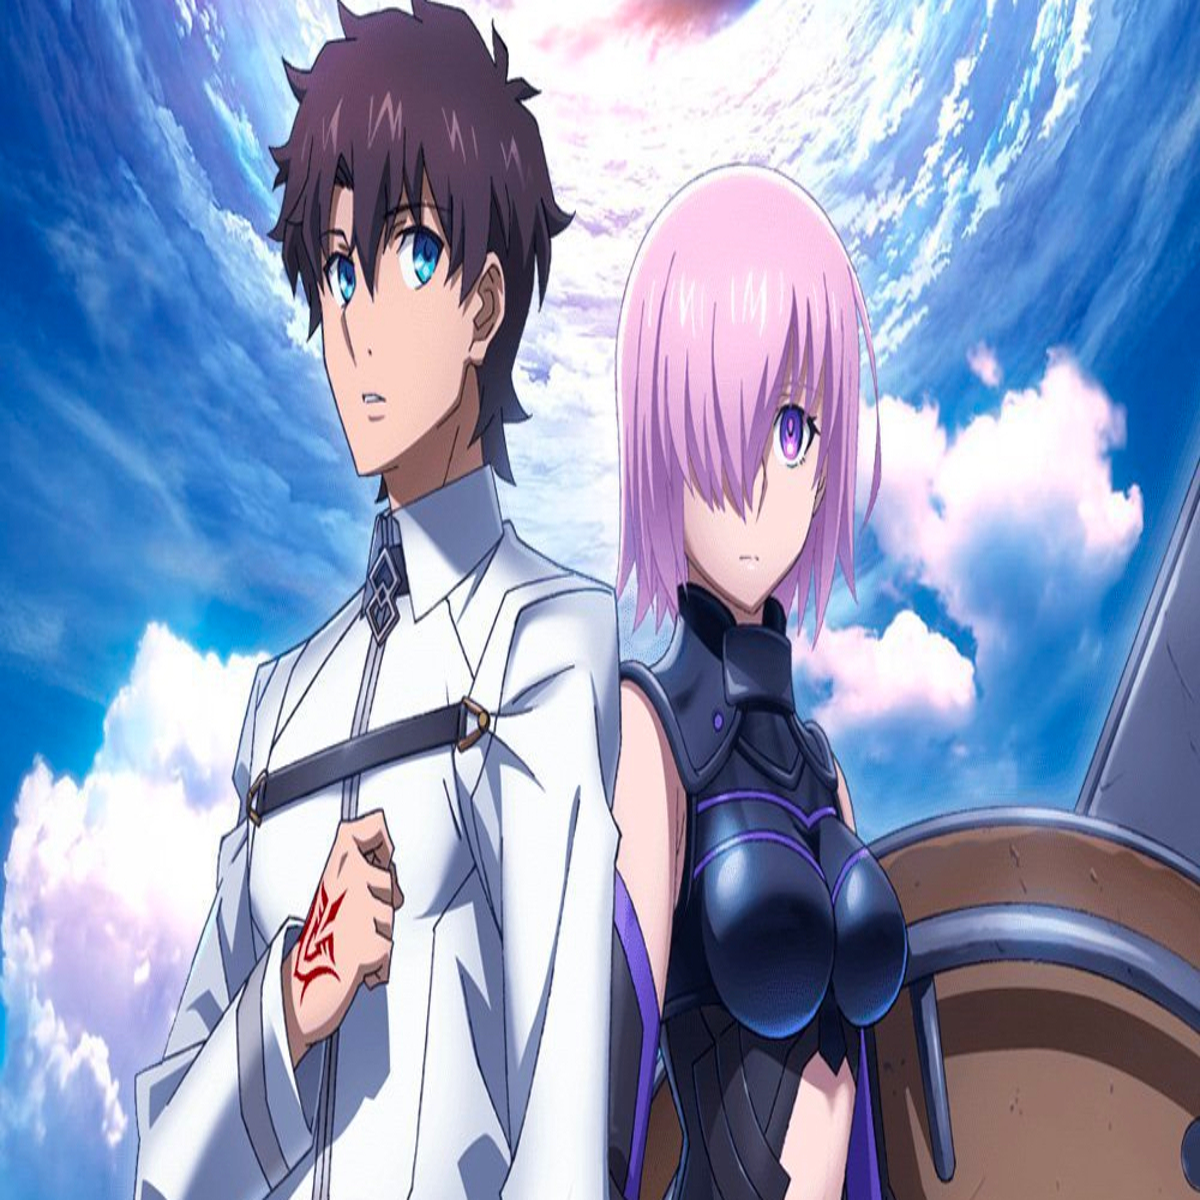 What 'Fate/' Anime Titles Are Streaming on Netflix? - What's on Netflix